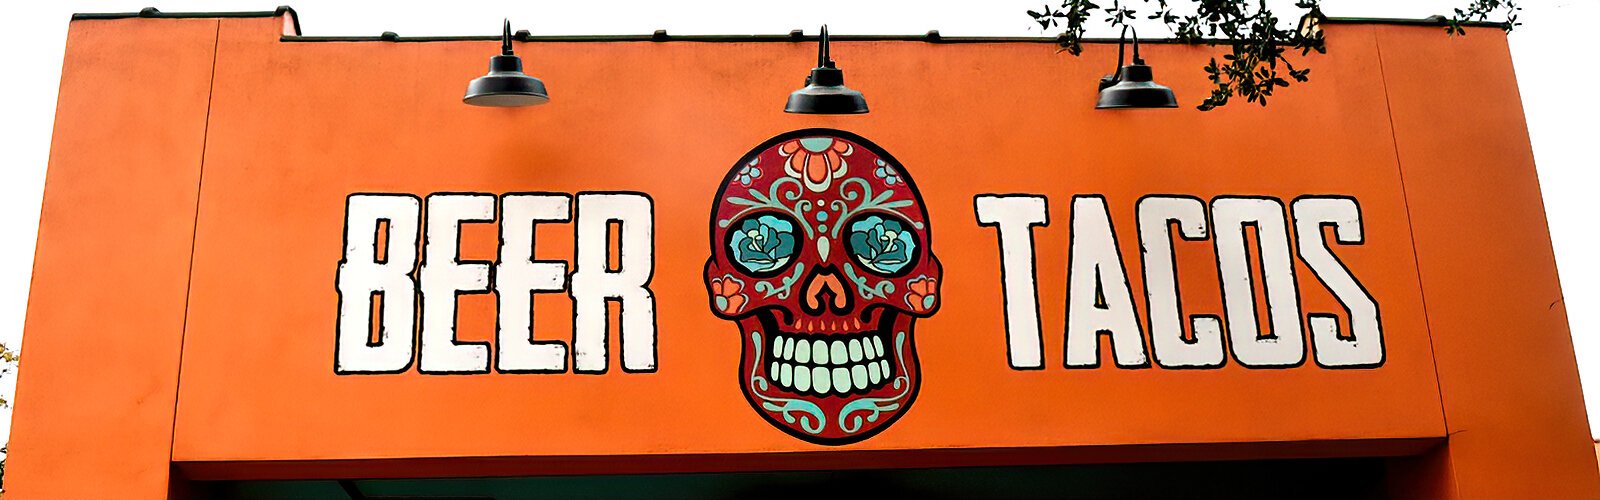 For Mexican cuisine, beer, tacos and a fun atmosphere, Casita Taqueria in the Grand Central District fits the bill.